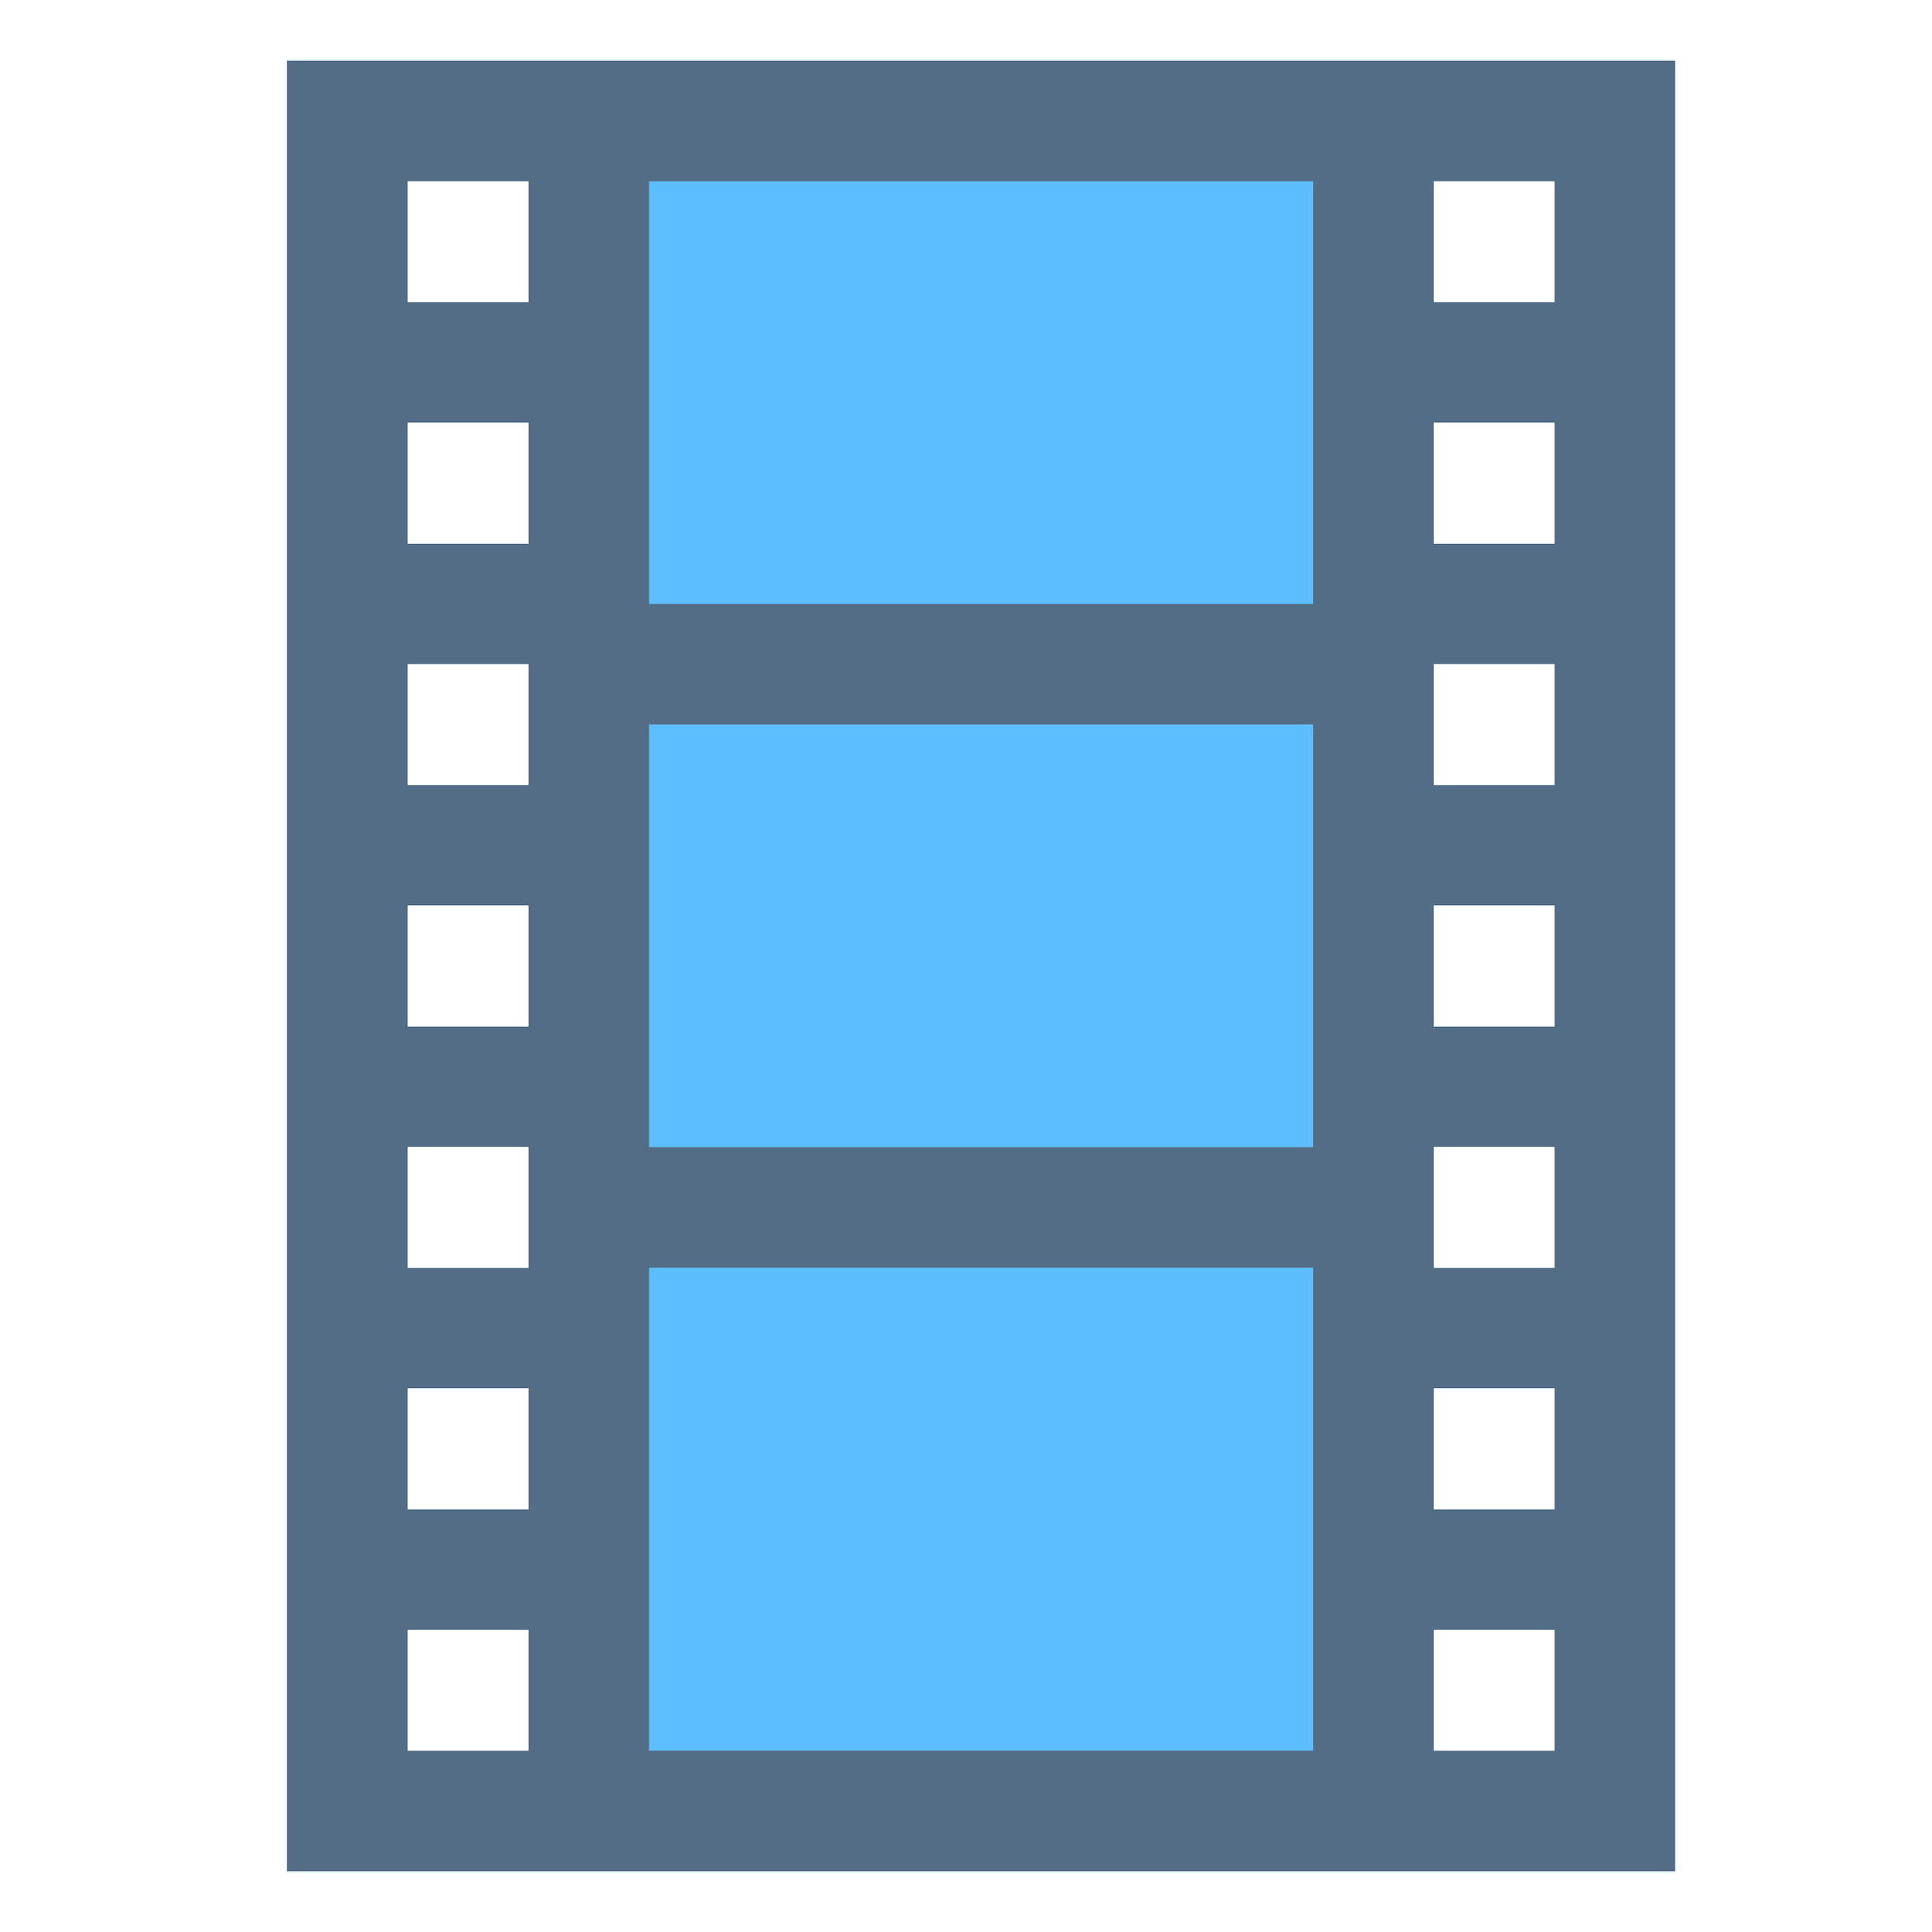 GIPHY Engineering  » Modifying FFMPEG to Support Transparent GIFs »  Modifying FFMPEG to Support Transparent GIFs